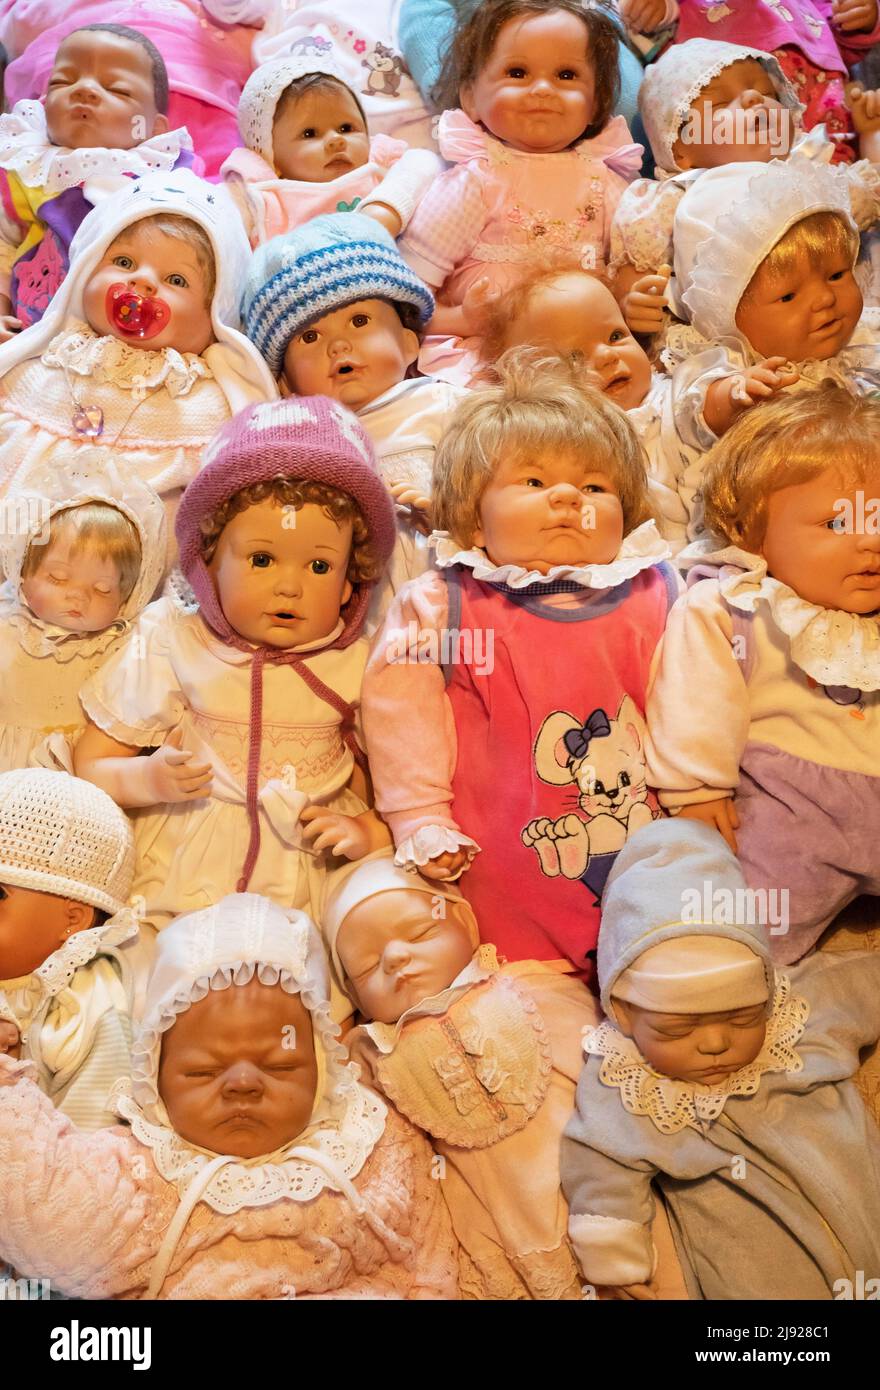 Various decorative dolls and baby dolls lying together, children's toys, symbolic image, Austria Stock Photo